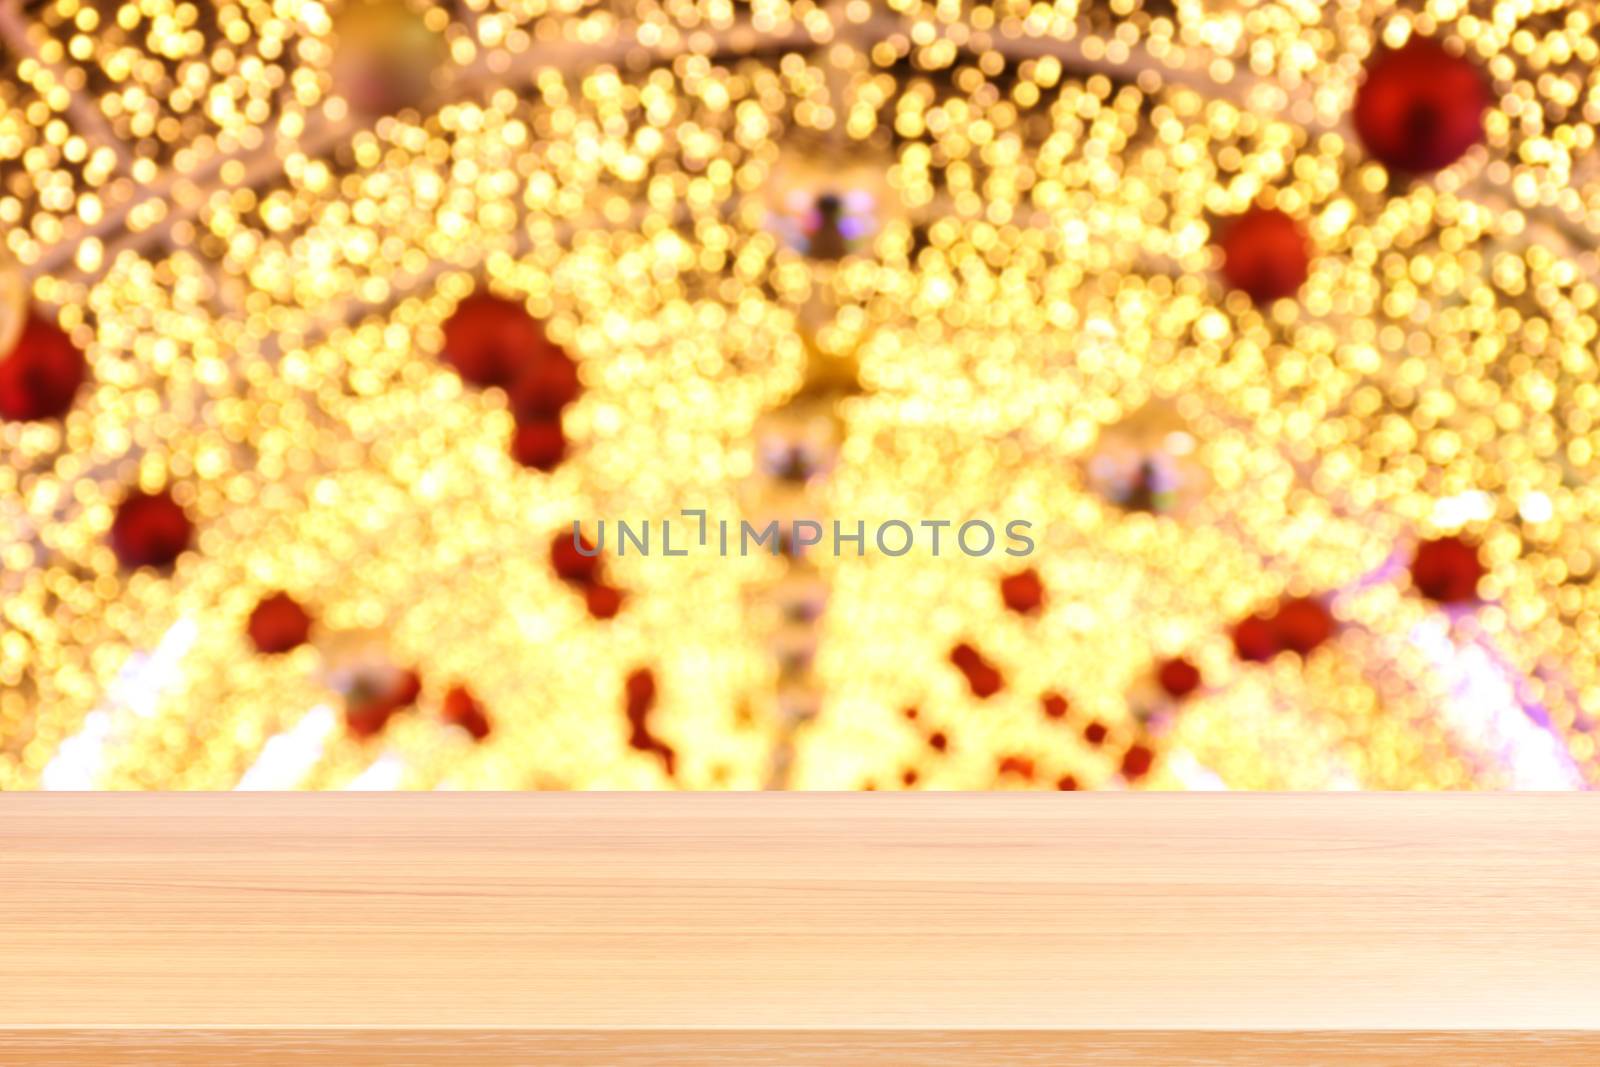 wood plank on arch bokeh golden yellow colorful background, empty wood table floors on door facade bokeh glitter light gold luxury, wood table board empty front arched entrance glittering gold light